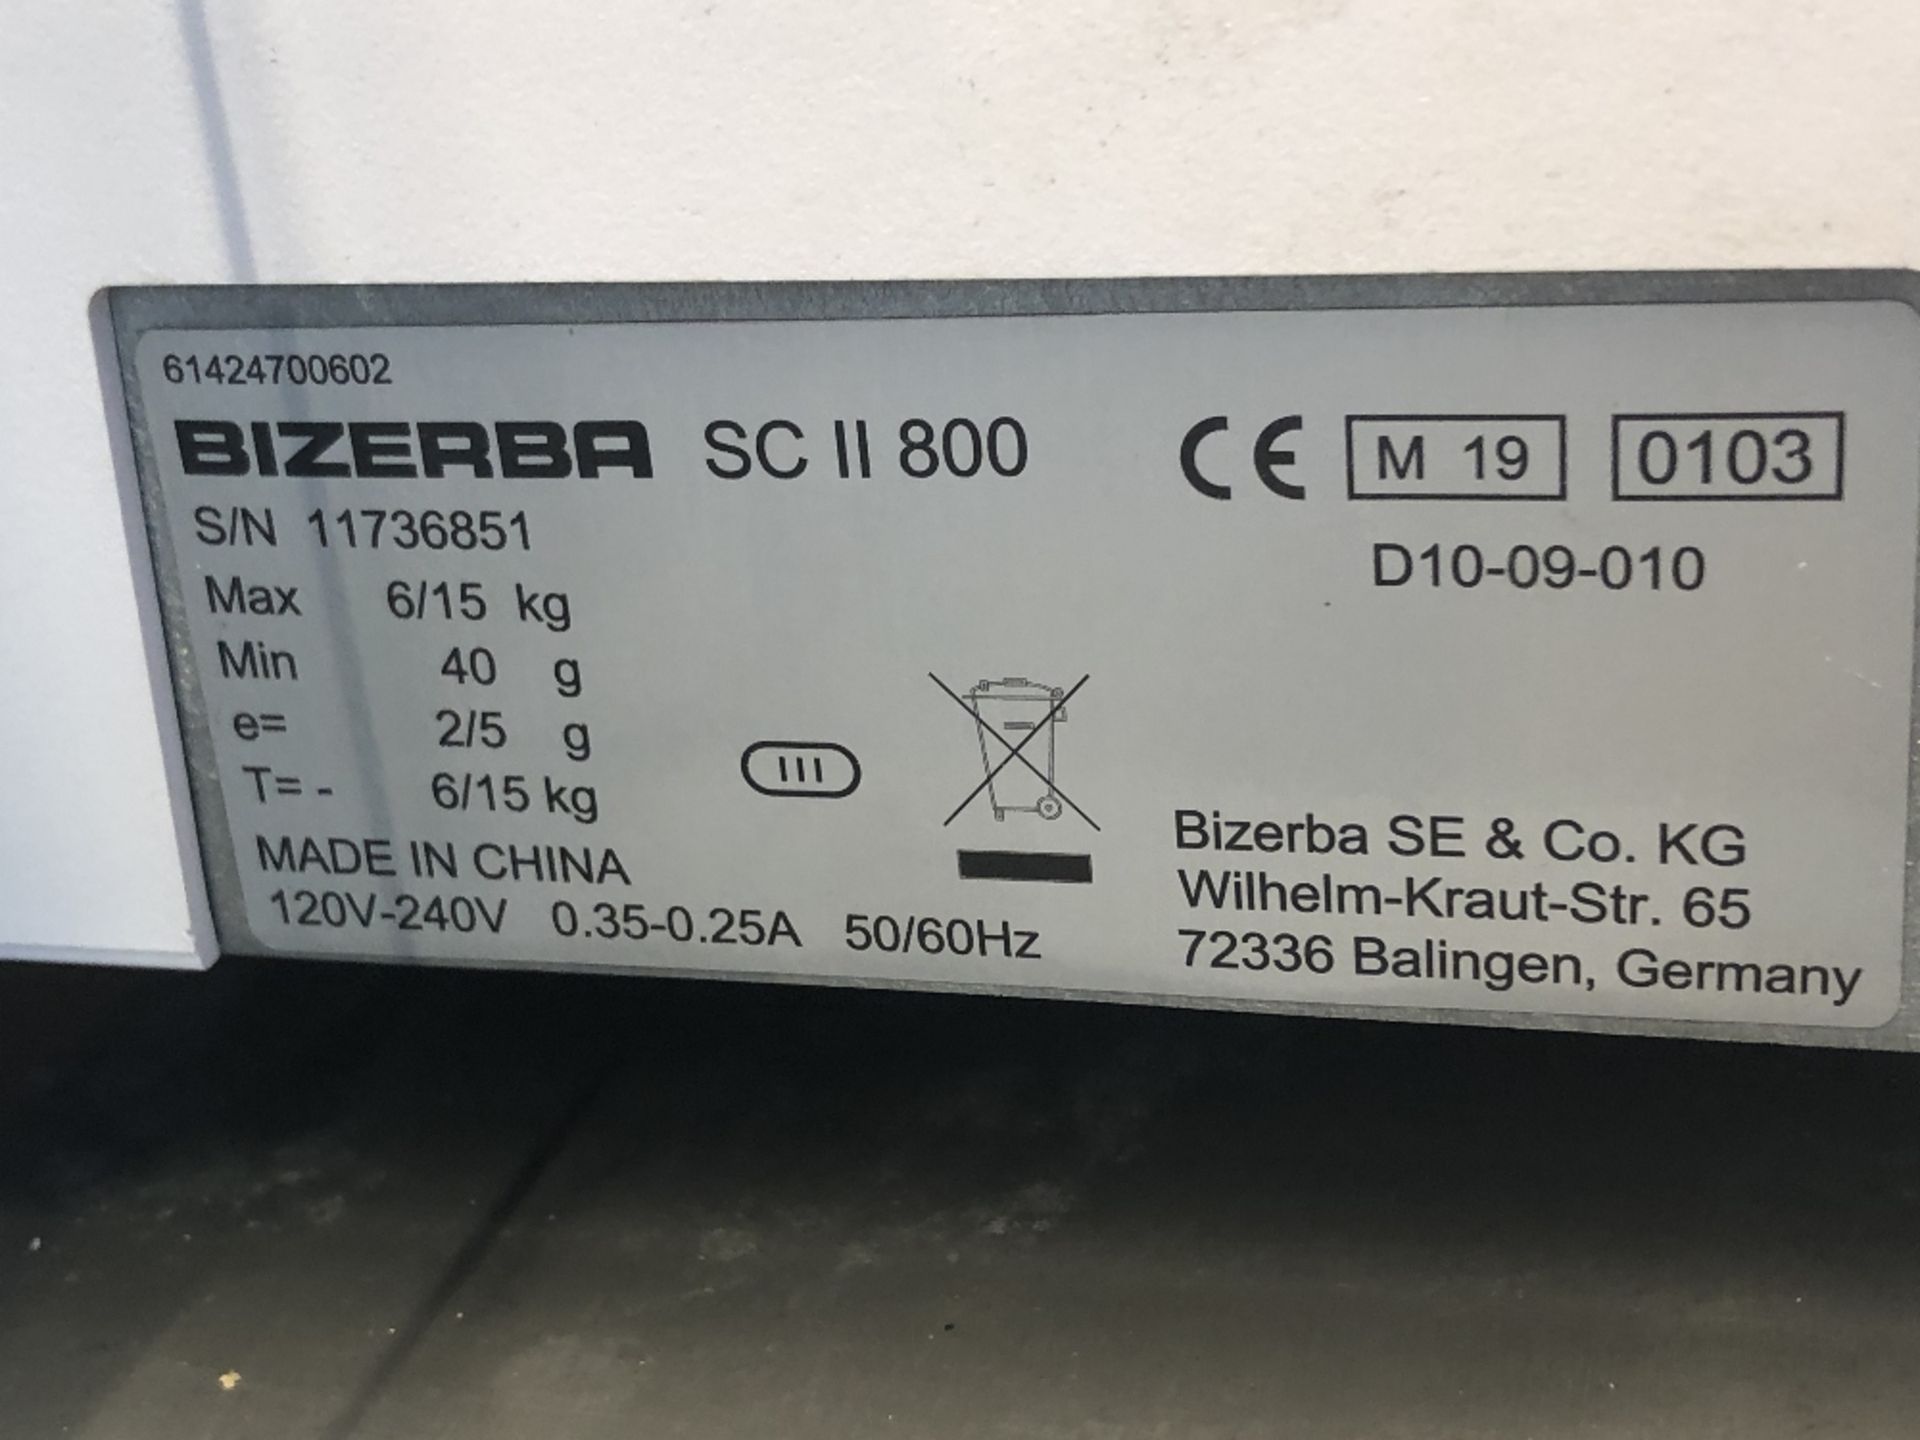 Bizerba SC II 800 Platform Scales with Integrated Label Printer - Image 4 of 4